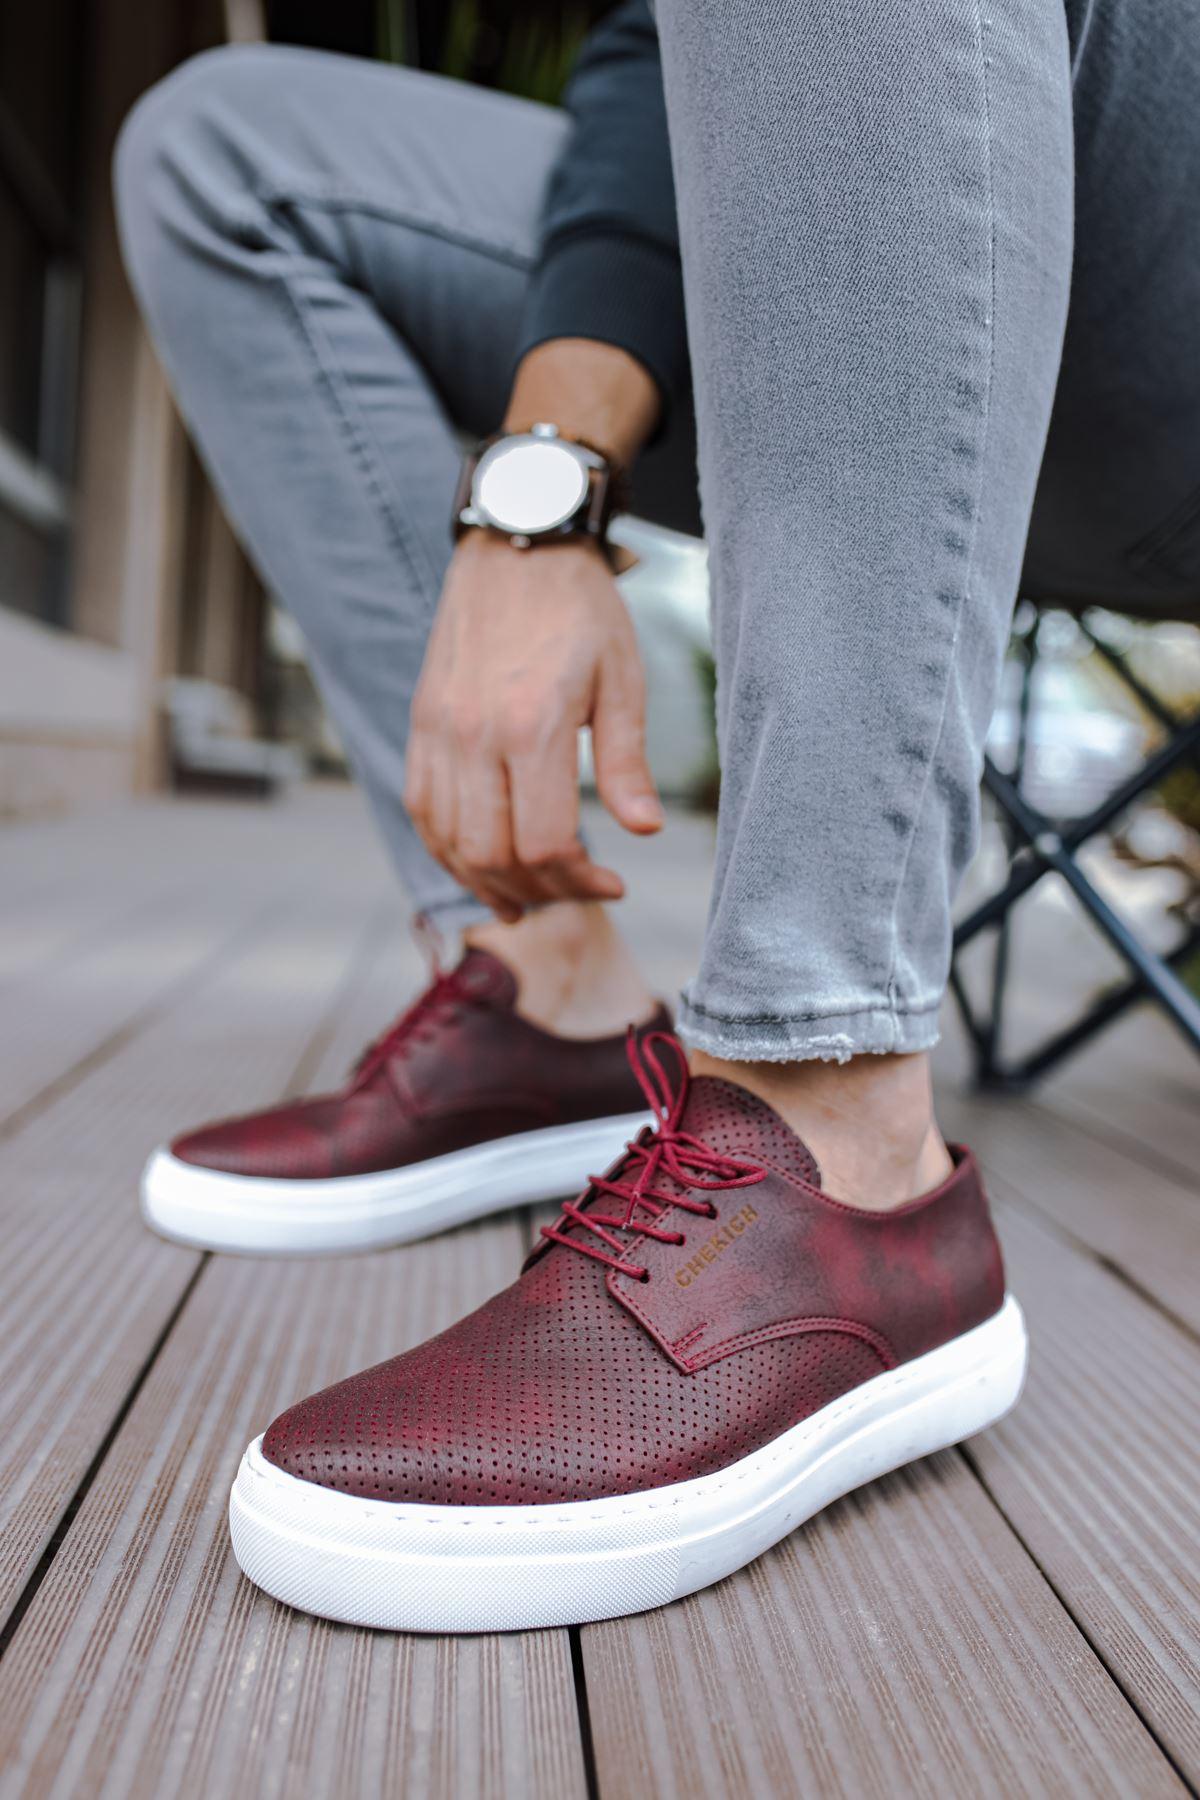 CH061 Men's Orthopedics Burgundy-White Sole Lace-up Casual Sneaker Shoes - STREET MODE ™